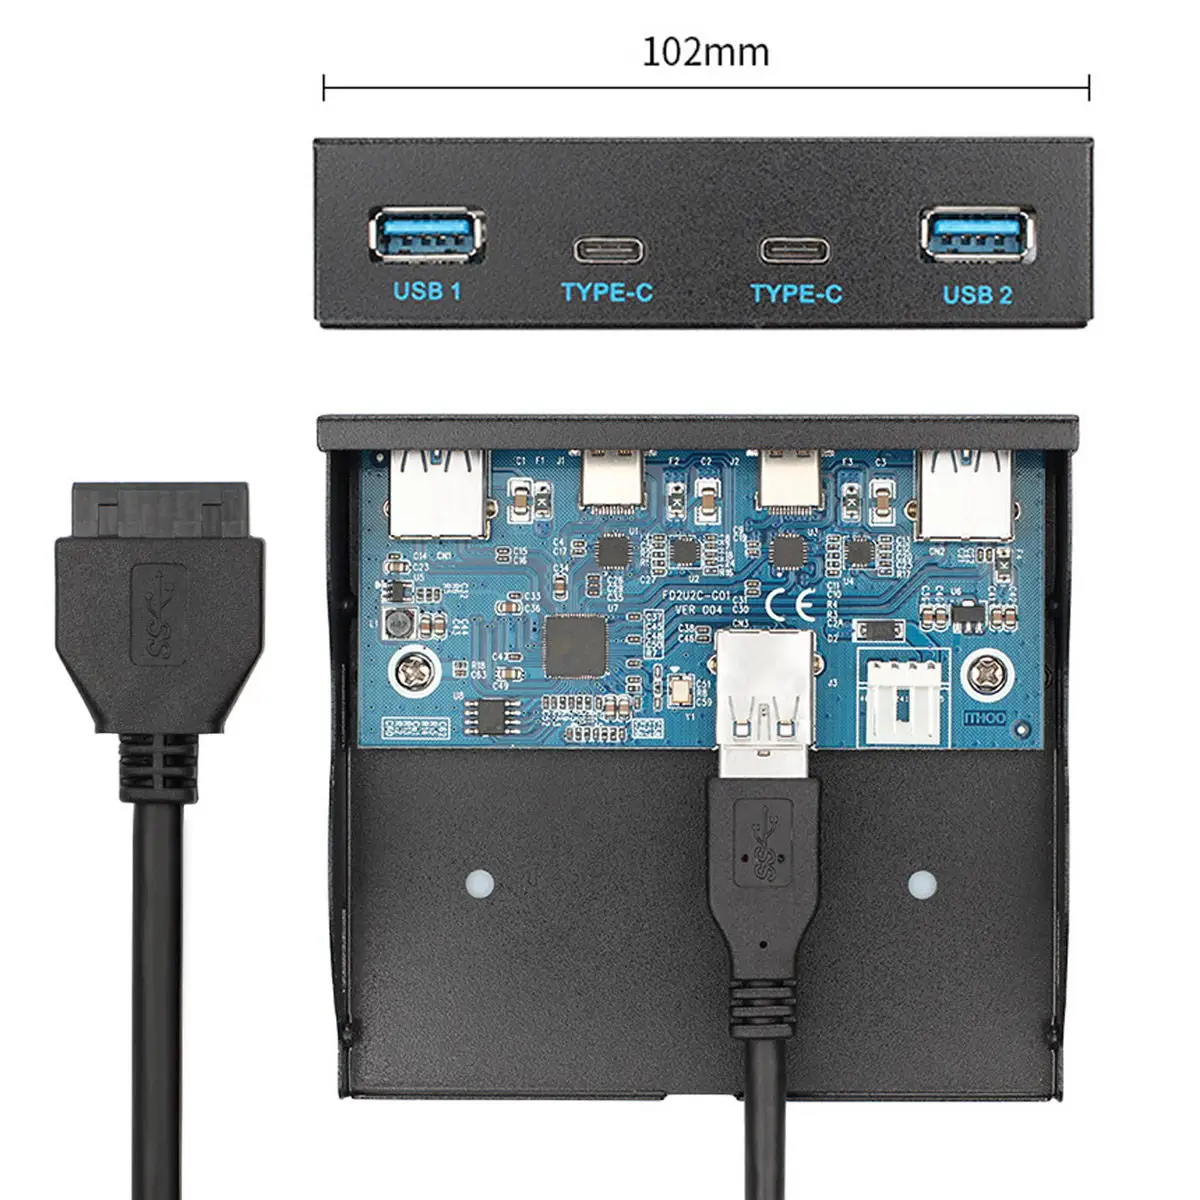 

Cablecc USB 3.0 HUB 4 Ports Front Panel & USB-C to Motherboard 20Pin Connector Cable for 3.5" Floppy Bay